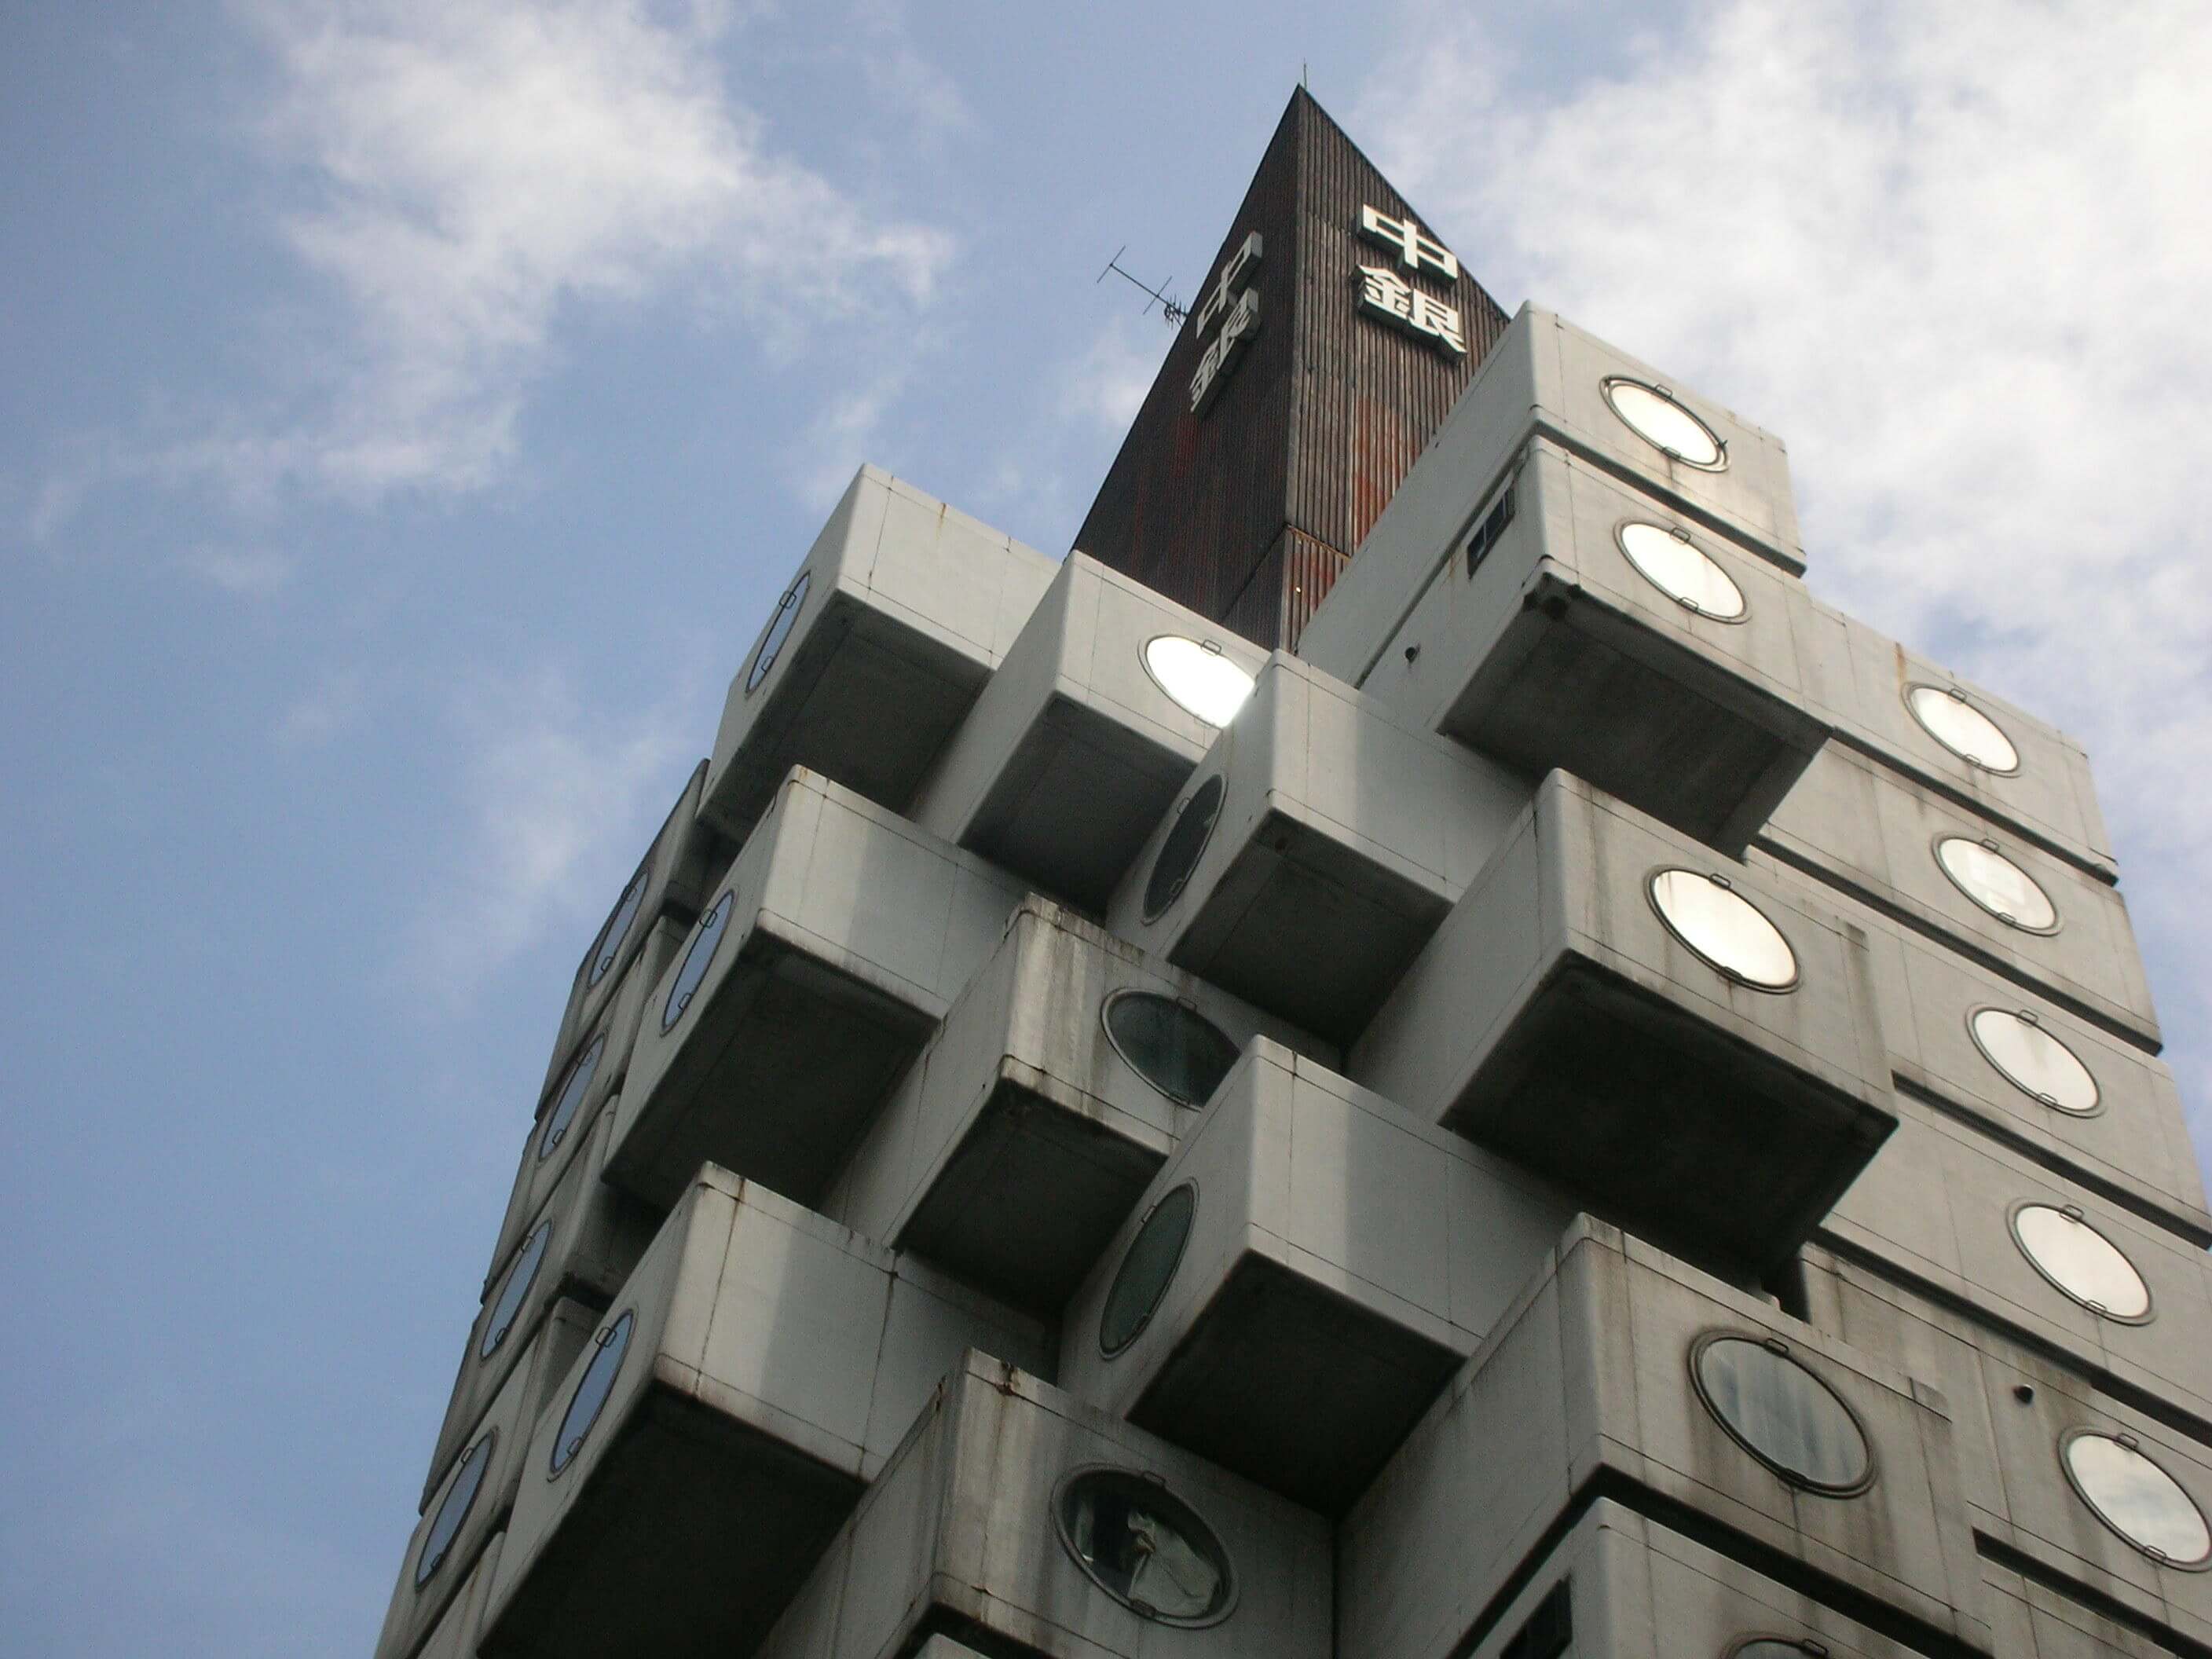 looking up at a capsule tower in tokyo, the Nakagin Capsule Tower